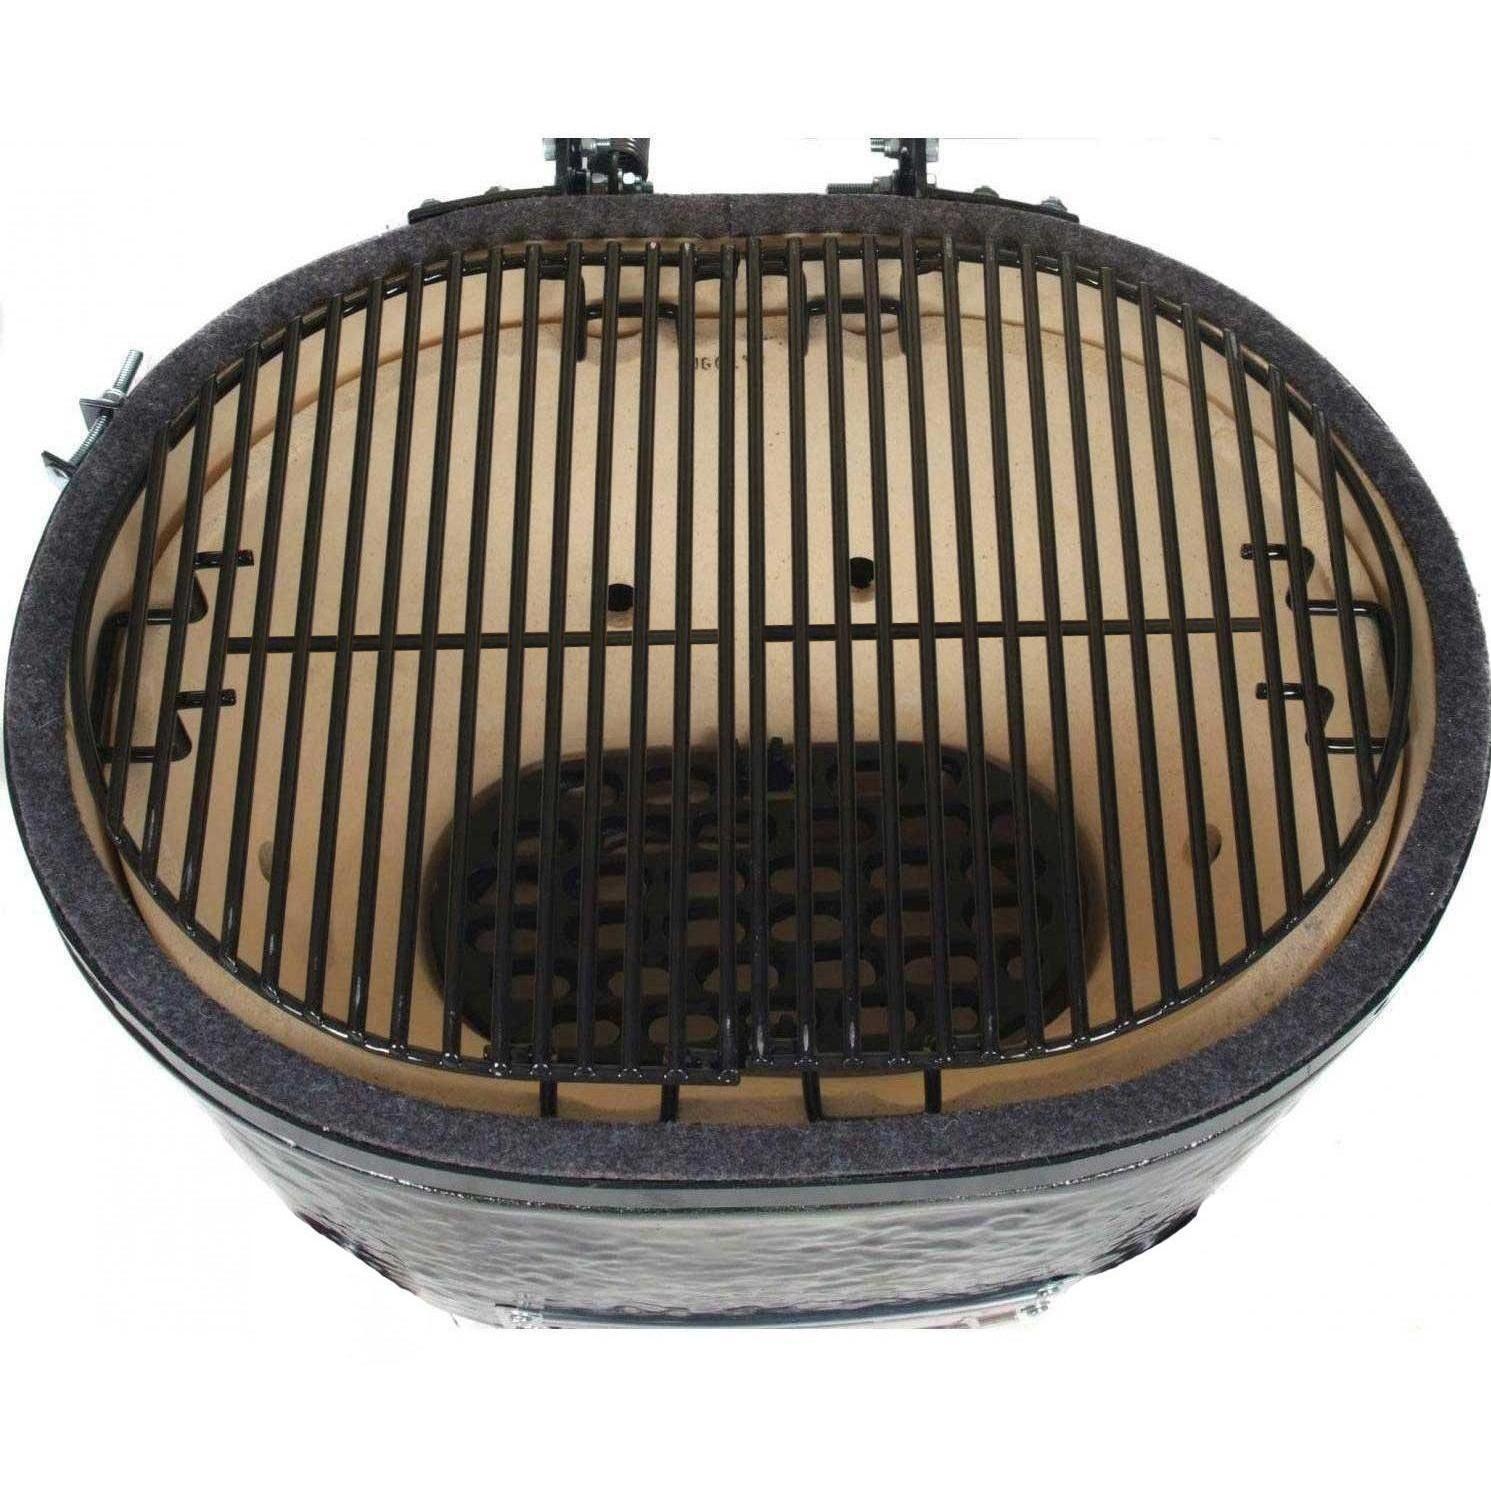 Primo All-In-One Large Ceramic Kamado Grill With Cradle Side Sh – BBQHangout